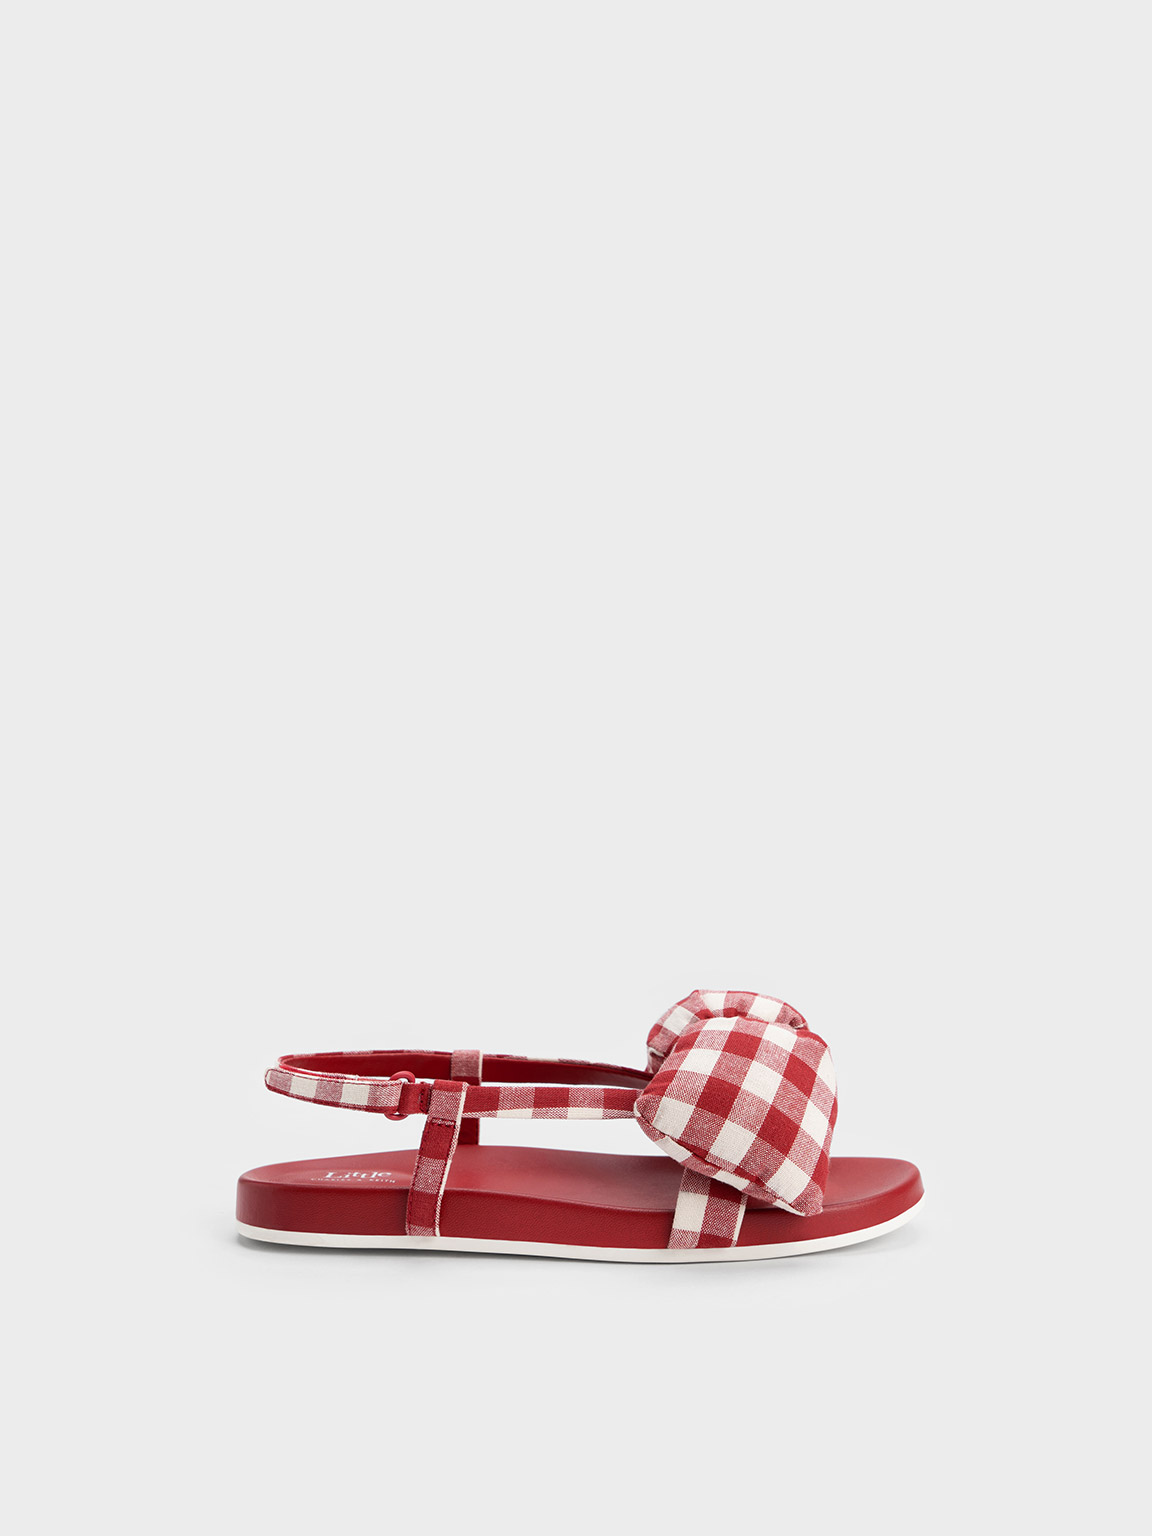 Girls’ Checkered Puffy Bow Sandals